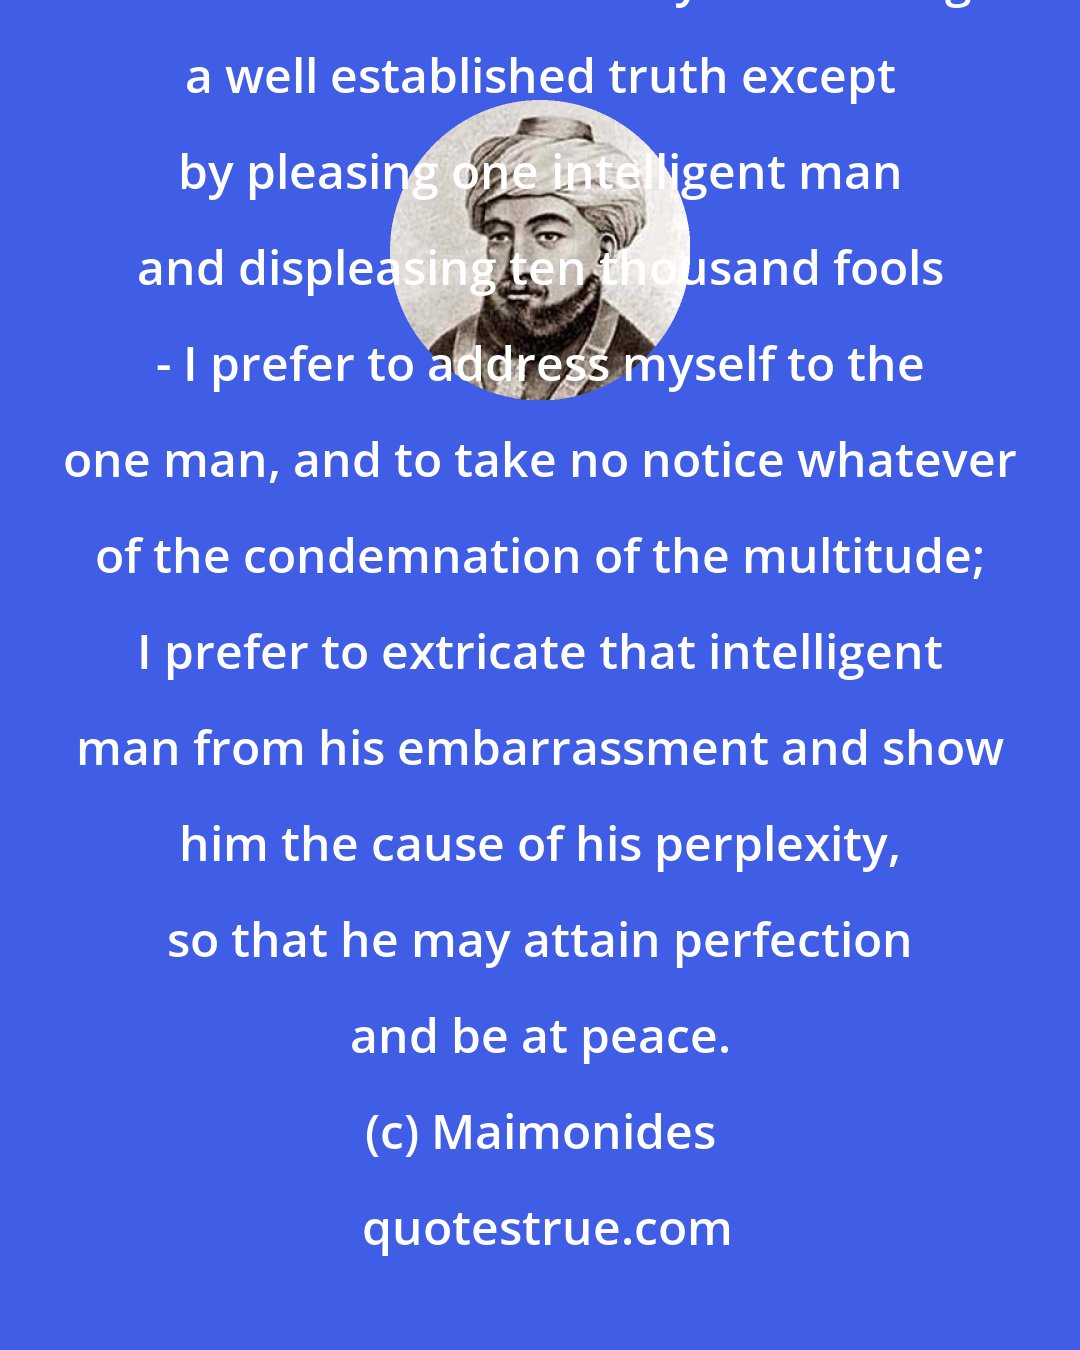 Maimonides: When I have a difficult subject before me - when I find the road narrow, and can see no other way of teaching a well established truth except by pleasing one intelligent man and displeasing ten thousand fools - I prefer to address myself to the one man, and to take no notice whatever of the condemnation of the multitude; I prefer to extricate that intelligent man from his embarrassment and show him the cause of his perplexity, so that he may attain perfection and be at peace.